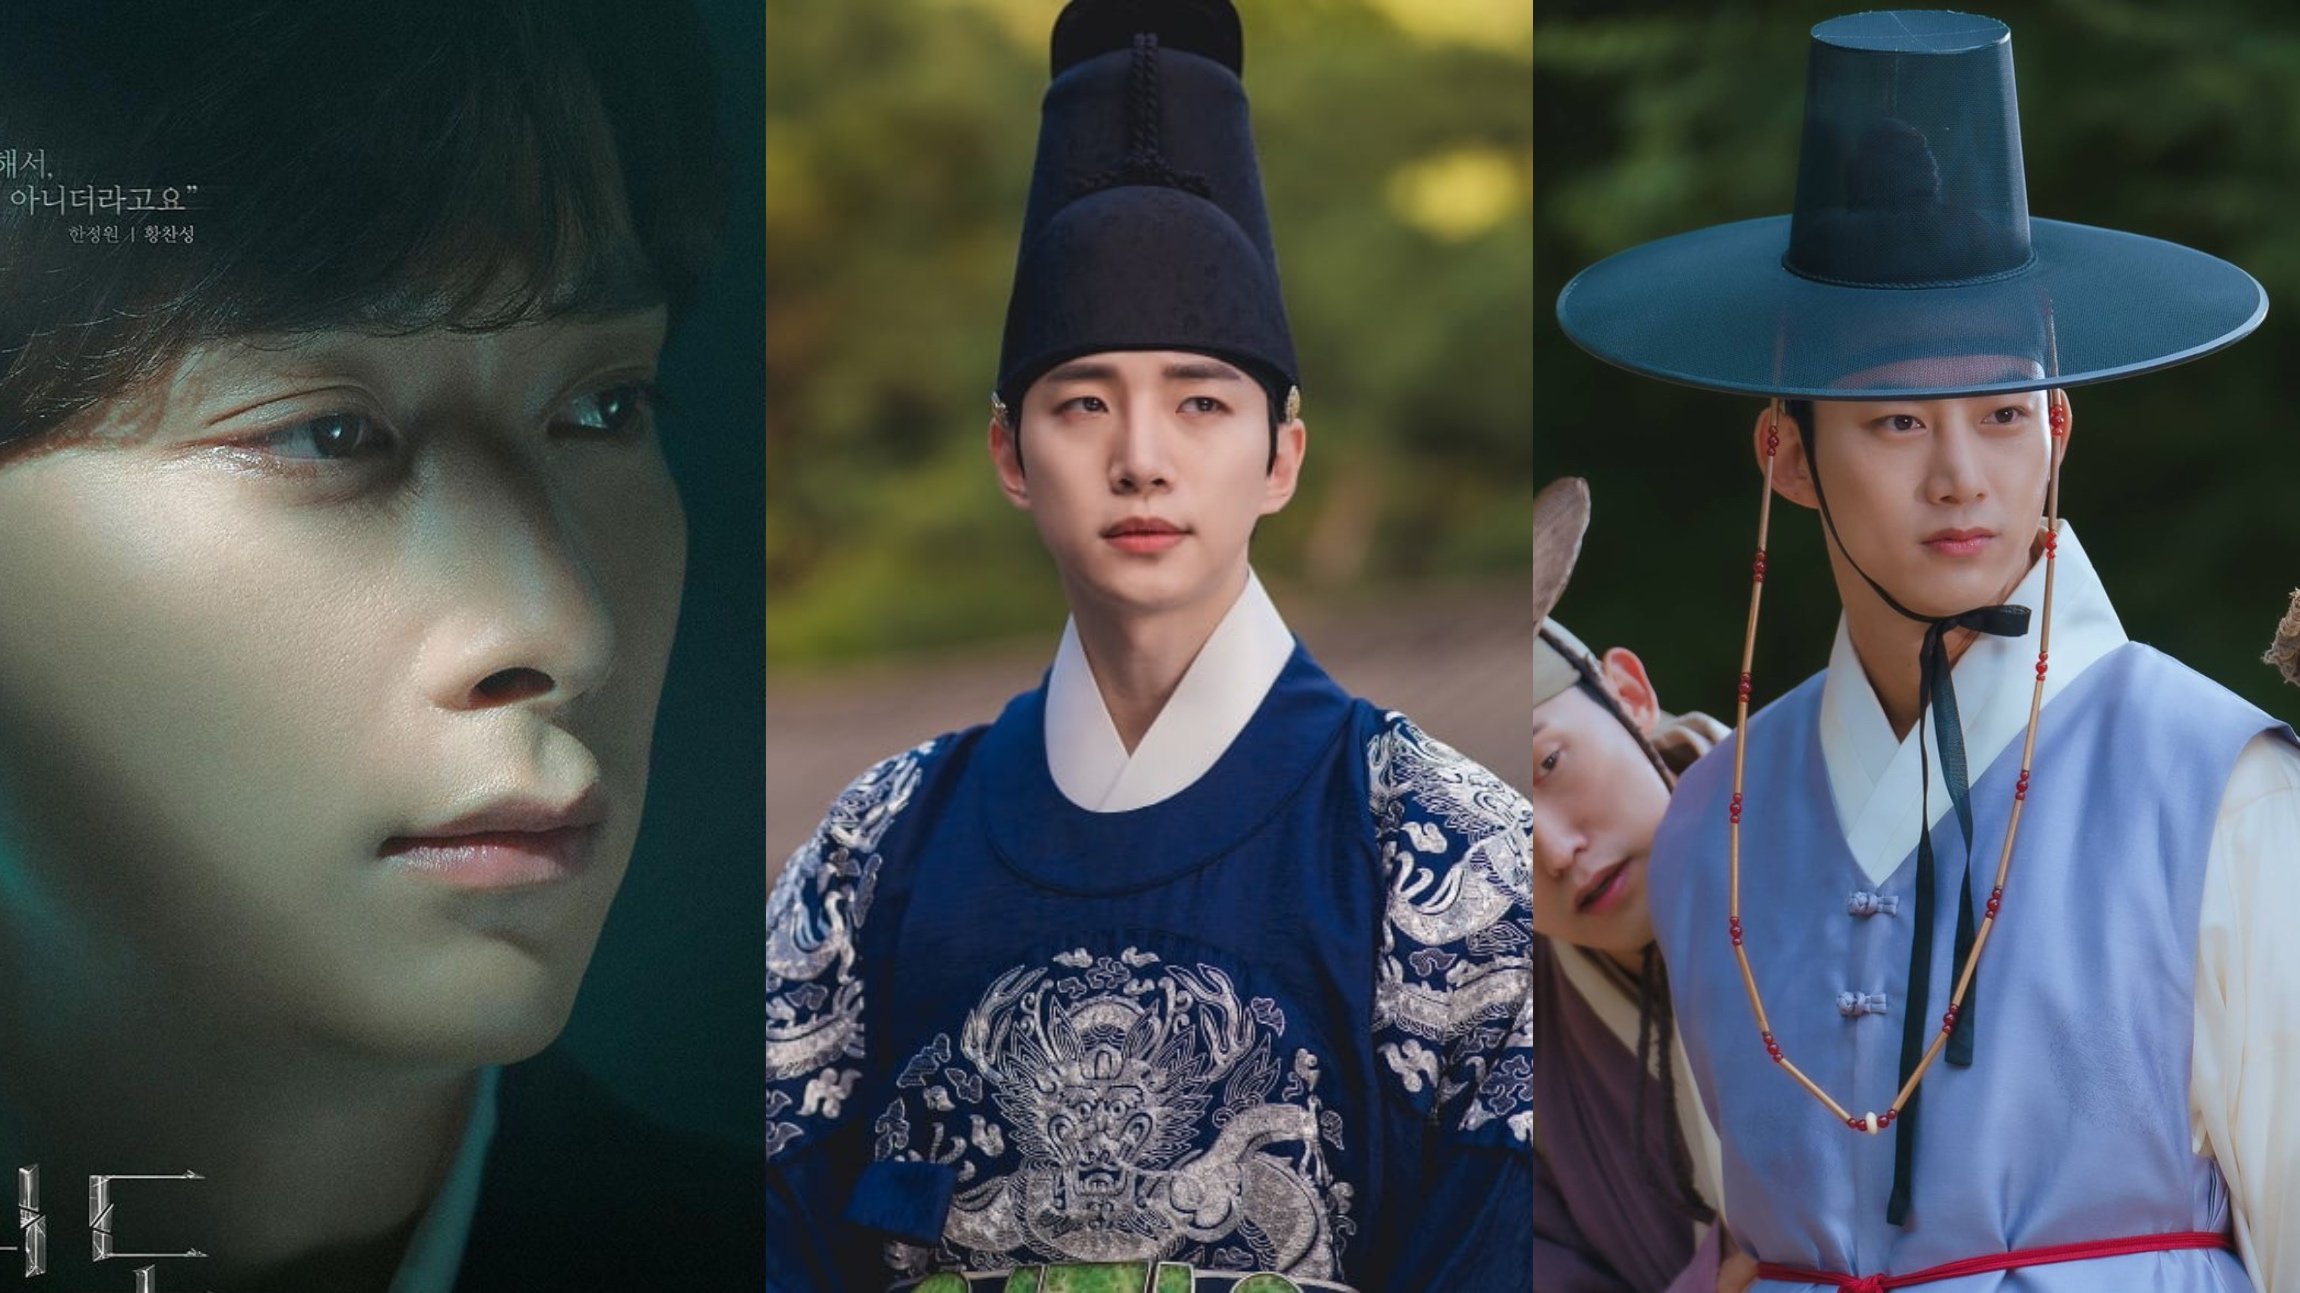 Chansung, Junho, and Taecyeon 2PM idols for November K-dramas dressed as their main characters